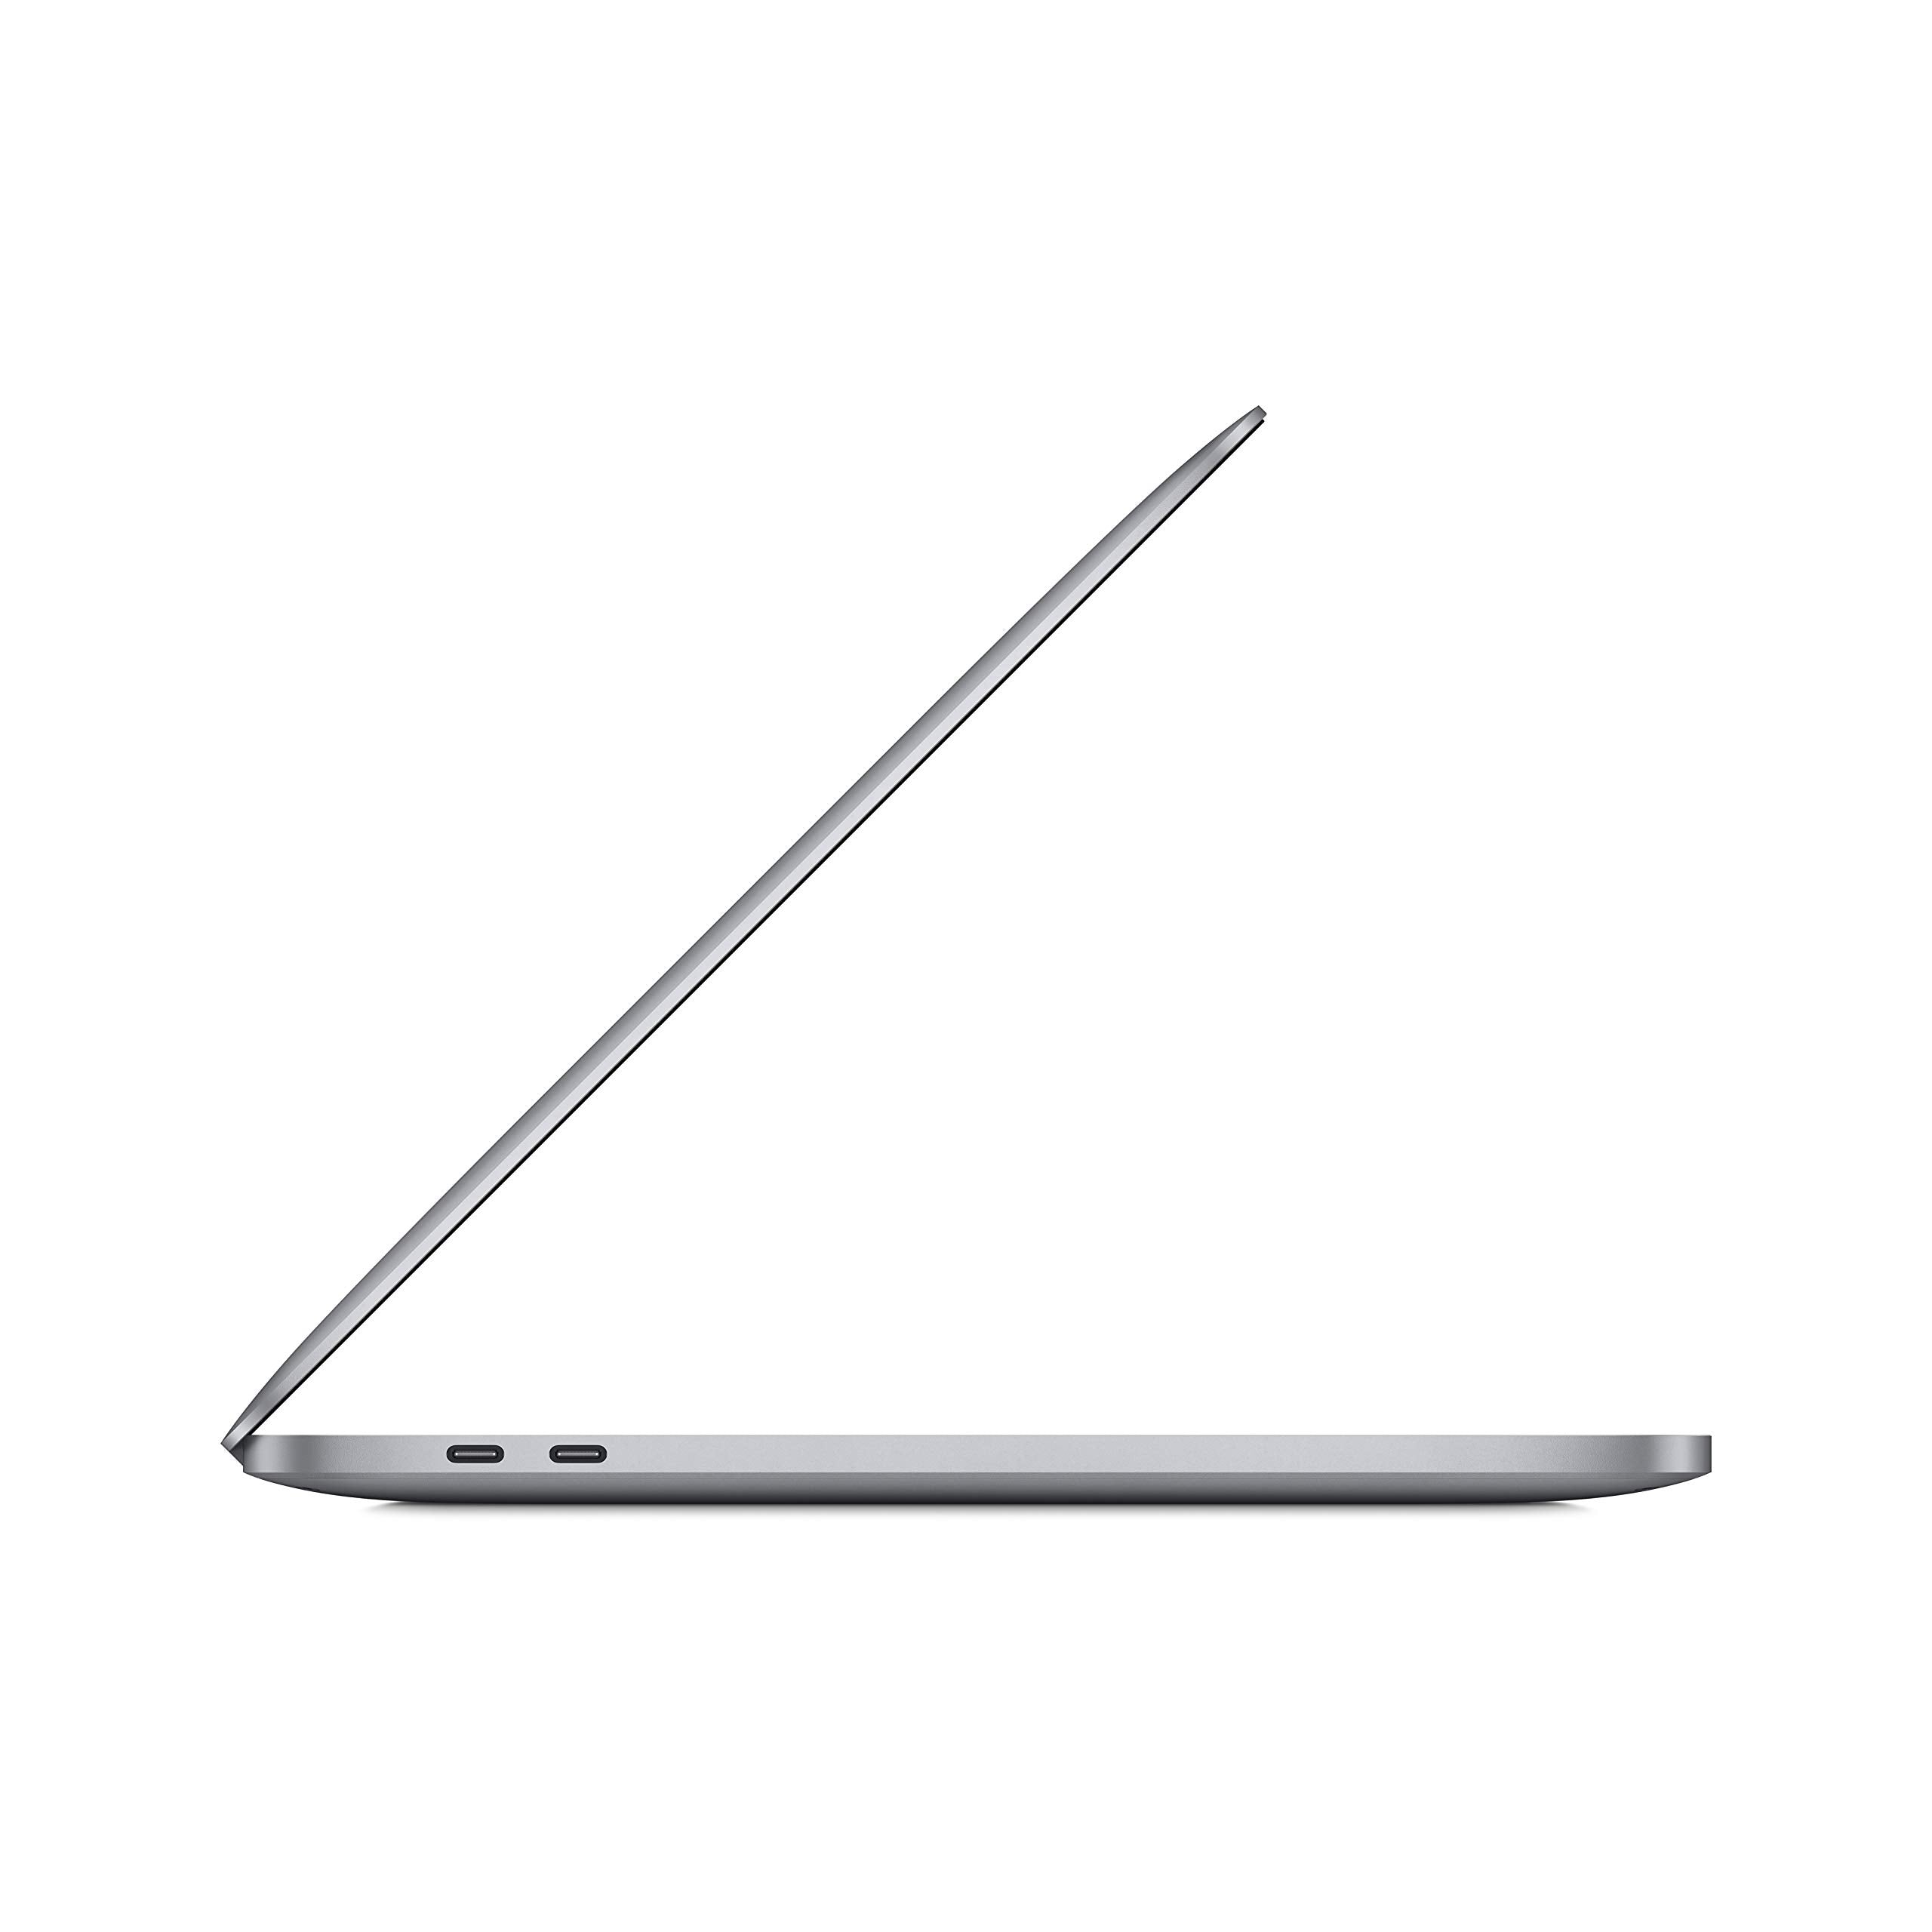 New Apple MacBook Pro with Apple M1 Chip (13-inch, 8GB RAM, 512GB SSD) - Space Grey (Latest Model)